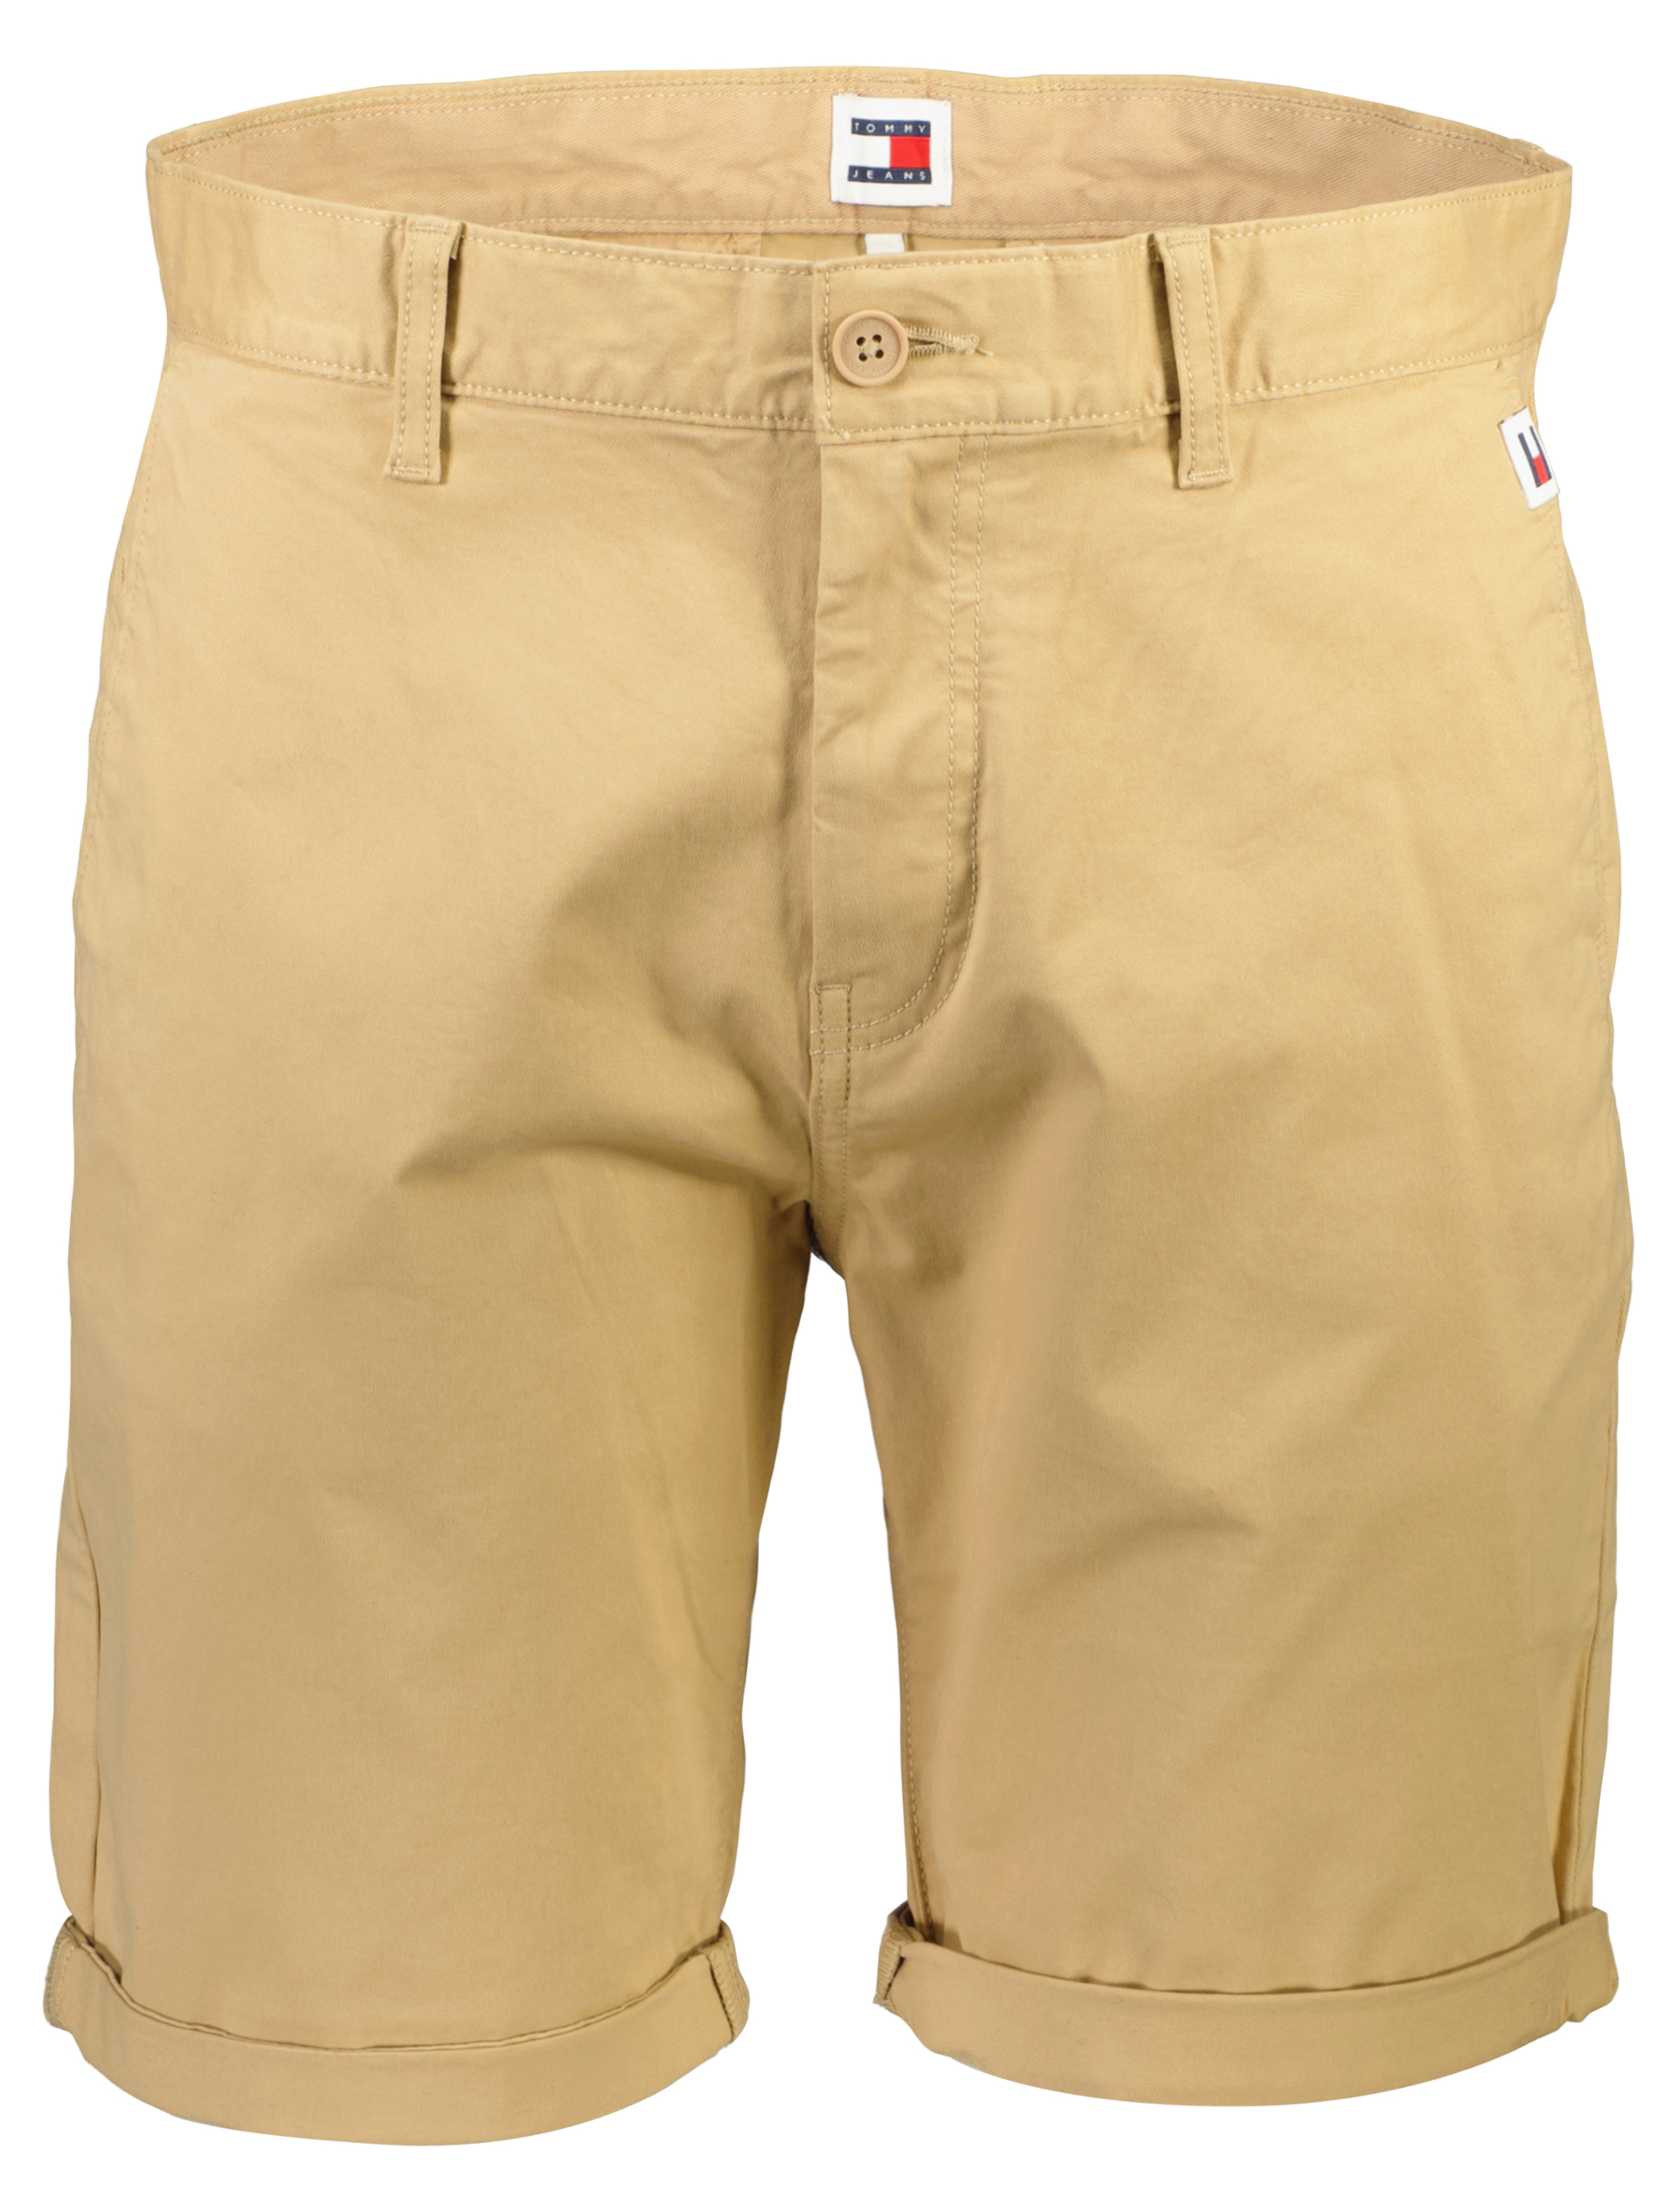 Tommy Jeans Chino shorts sand / ab0 tawny sand